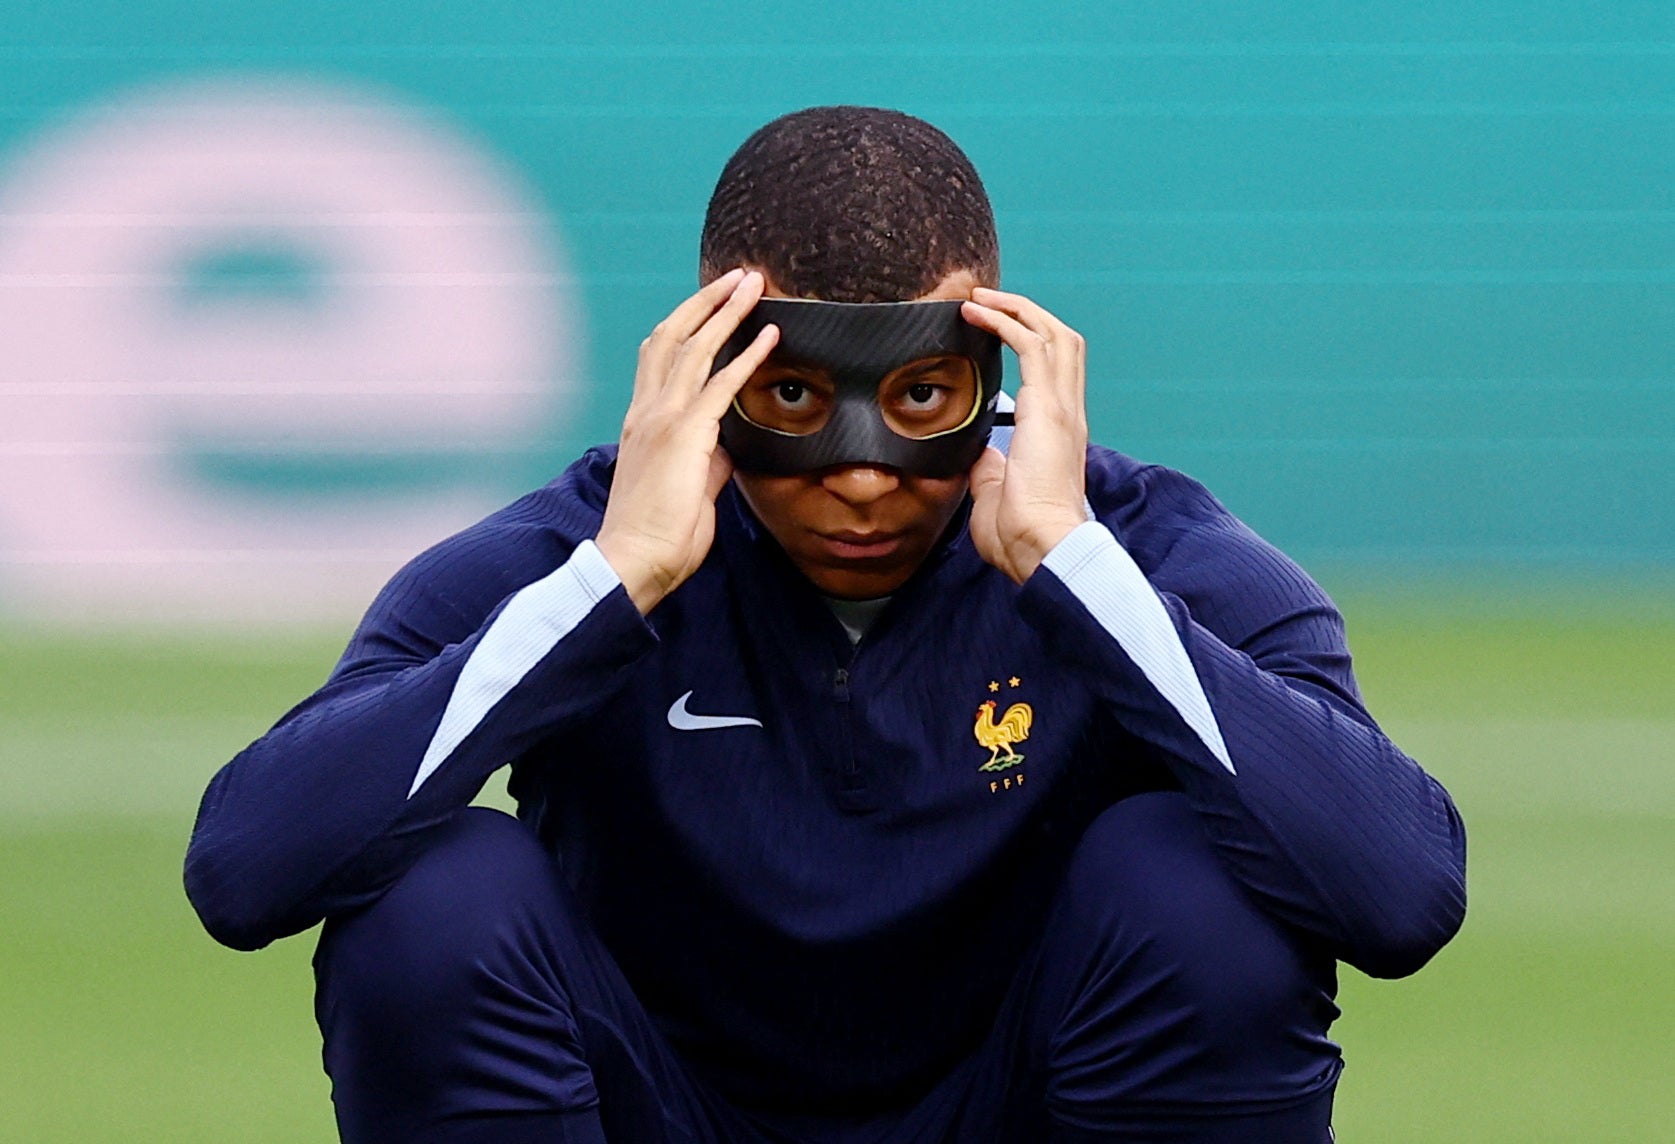 Kylian Mbappe wears a black face mask during his warm-up against the Netherlands